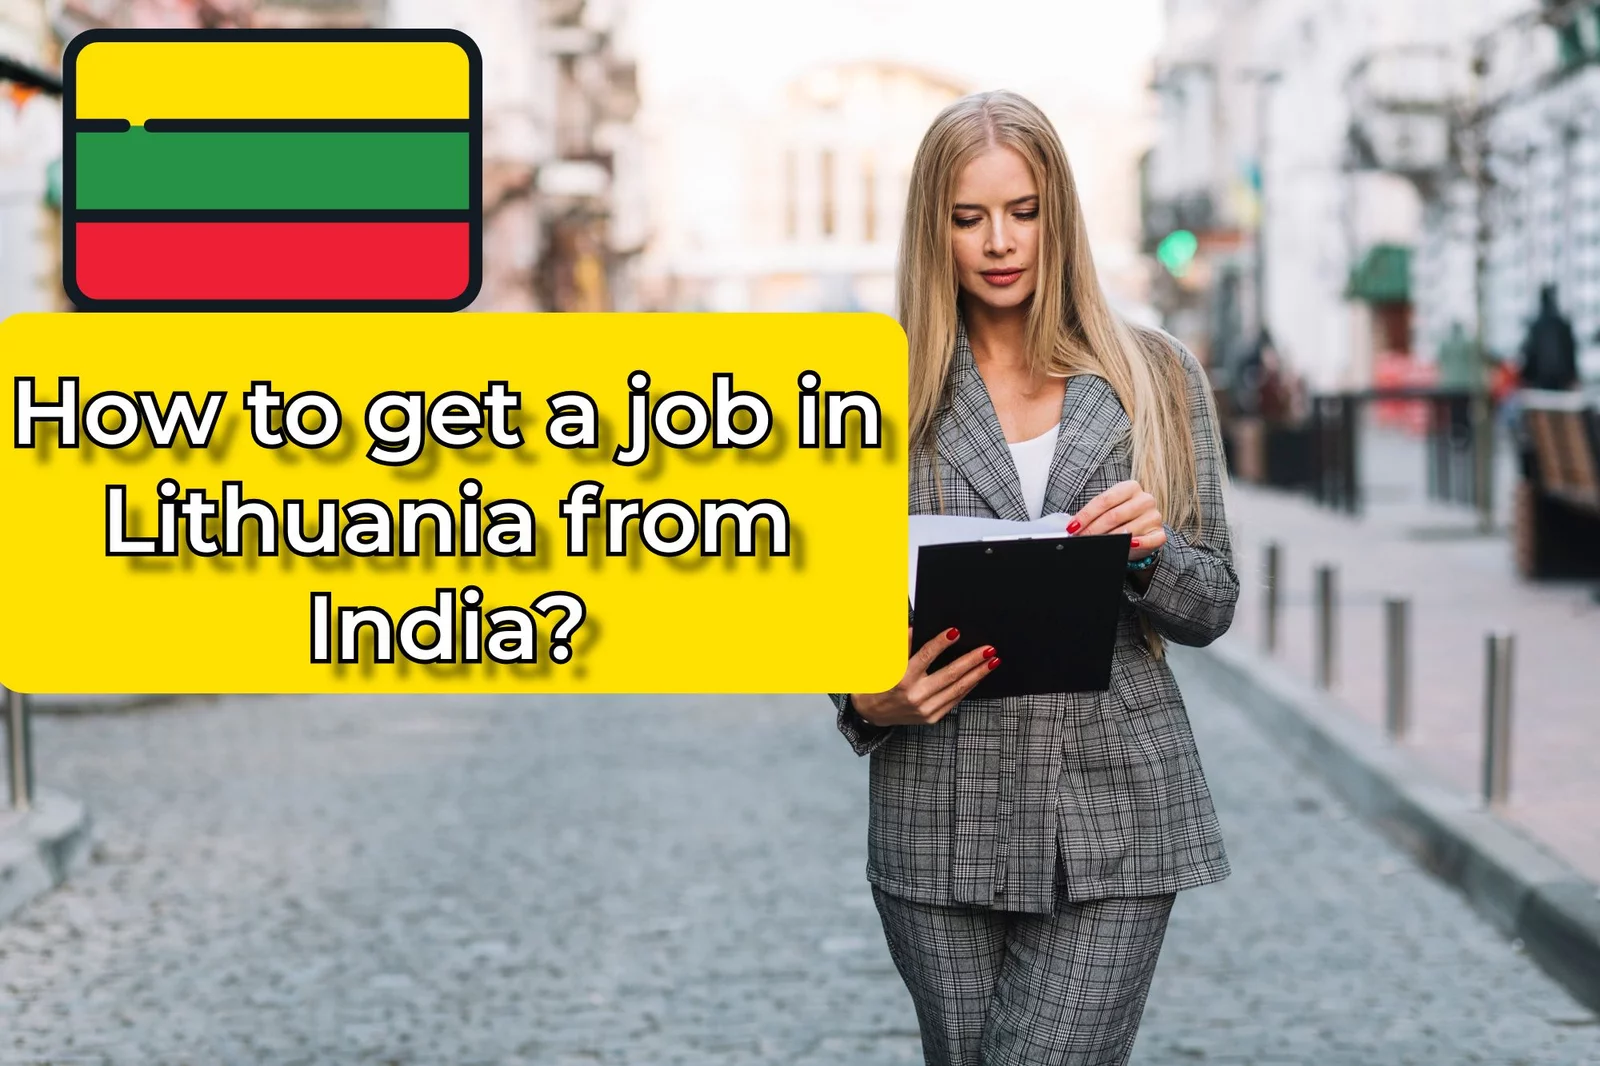 How to get a job in Lithuania from India?